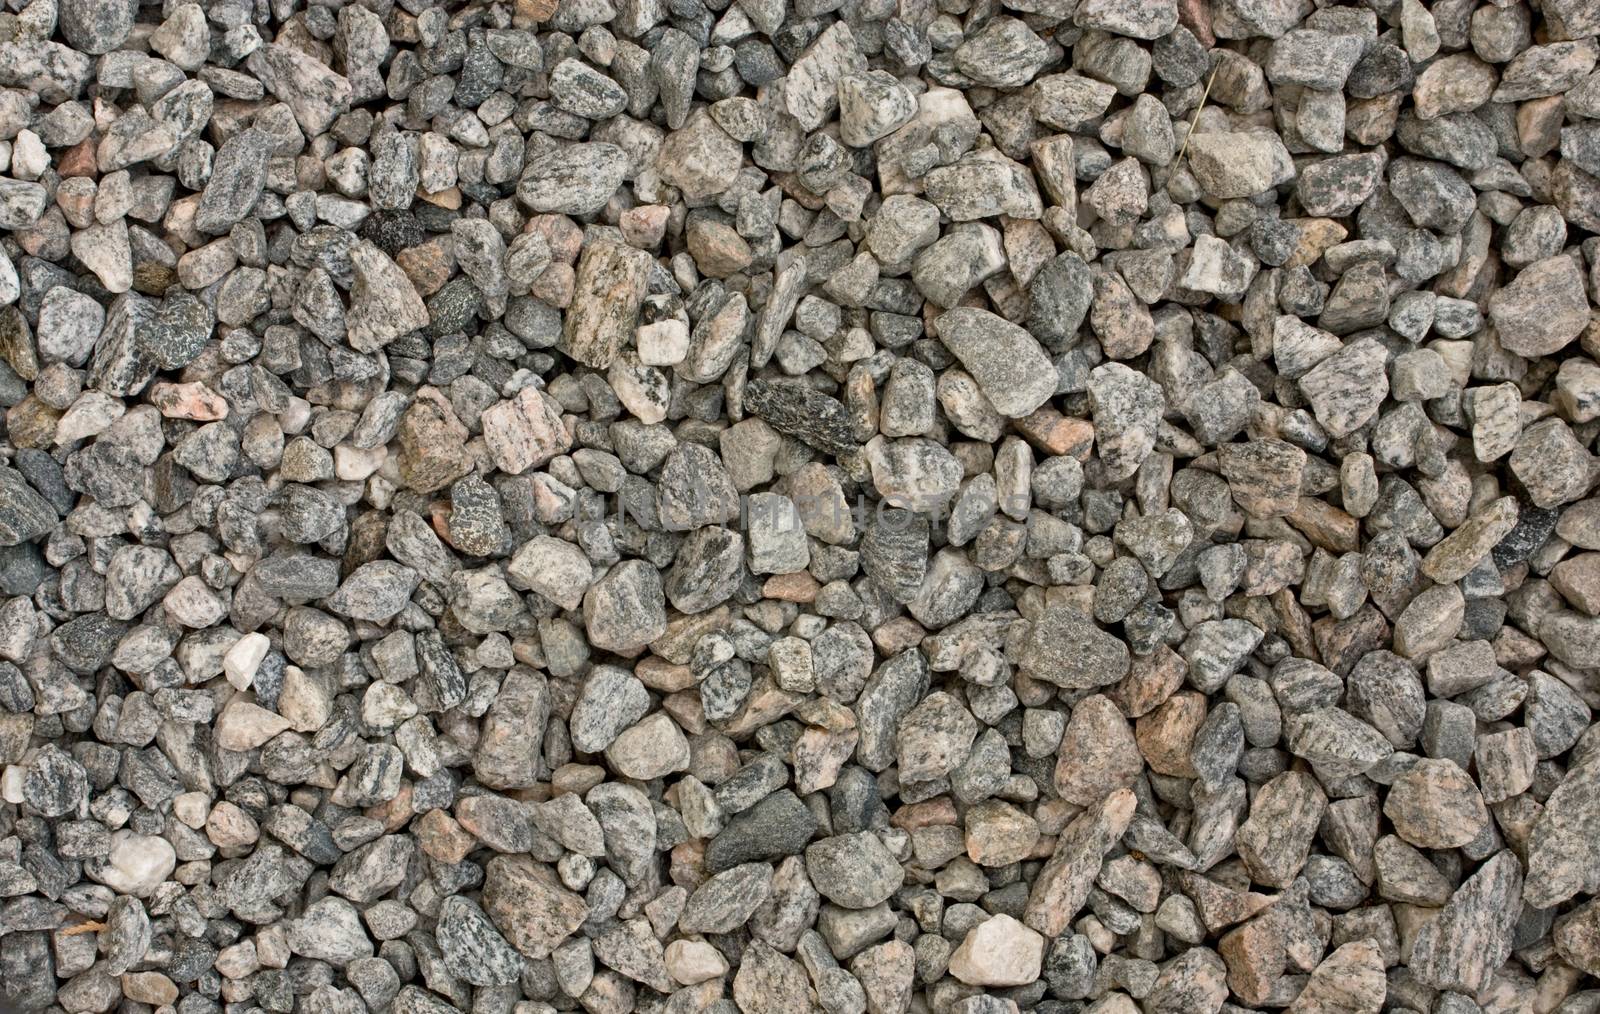 Background of grey gneiss gravel